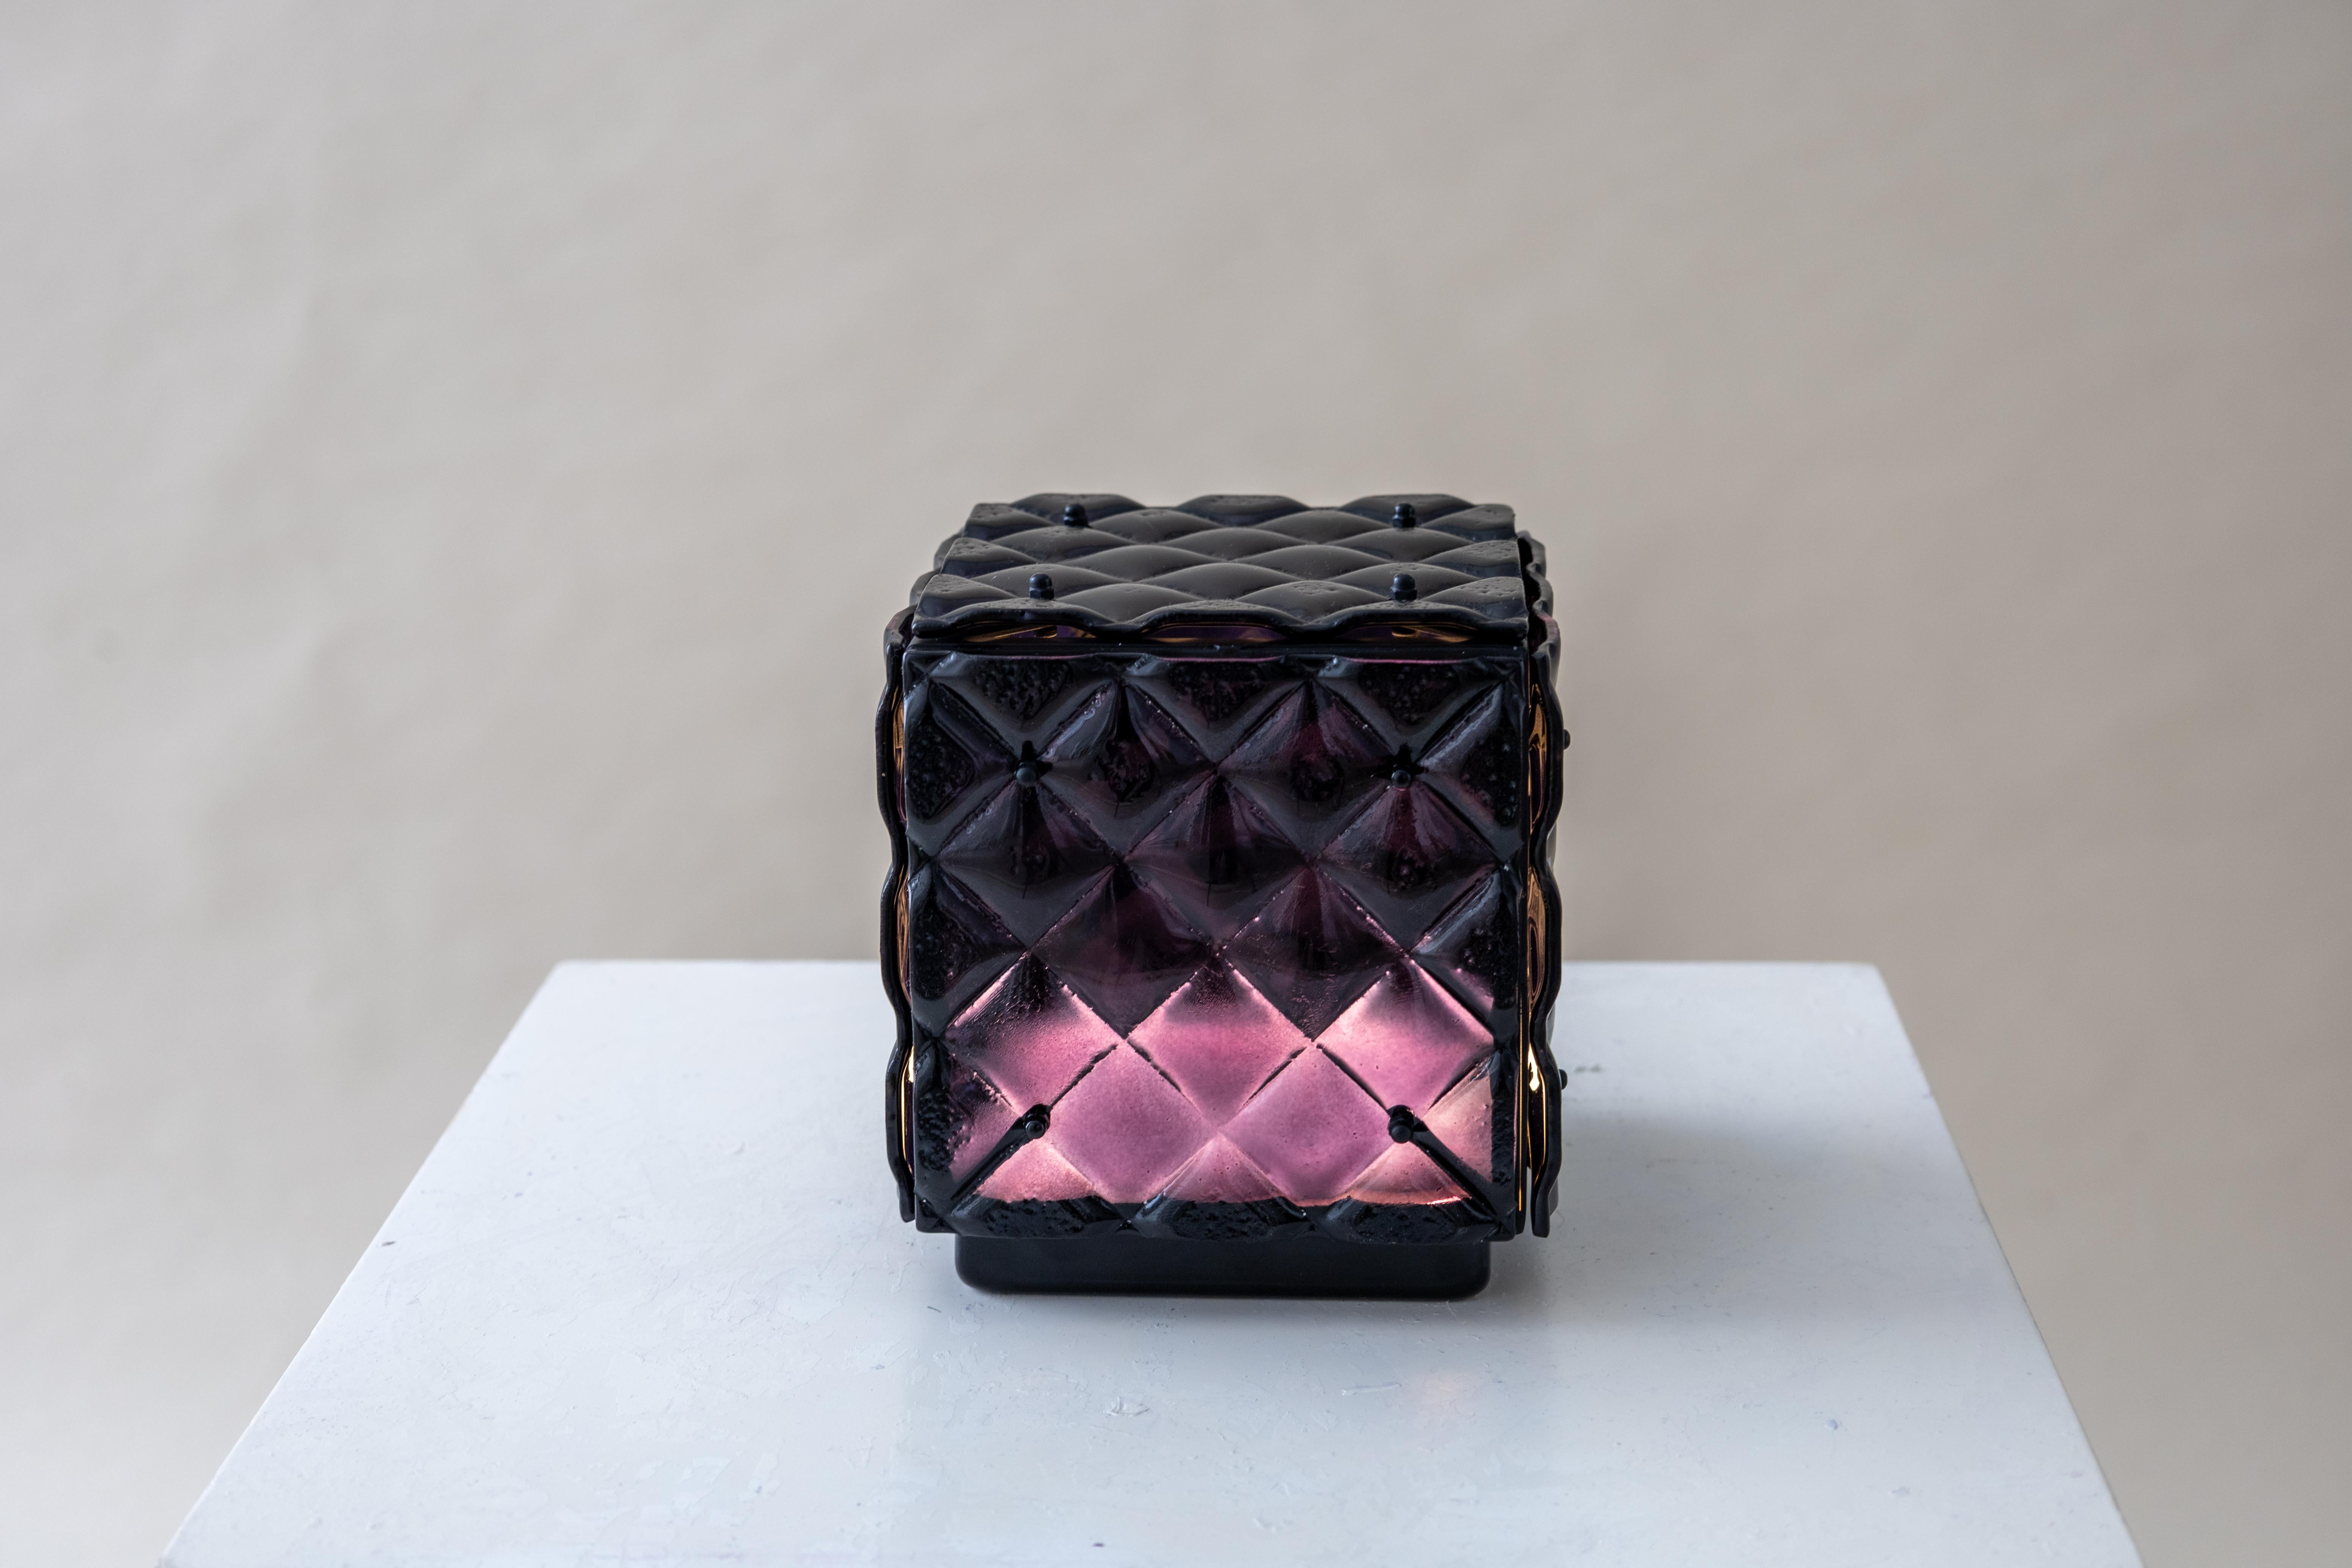 Glass Cube Lamp Black Ambient Light Artisanal Fused Glass Contemporary Design In New Condition For Sale In València, ES